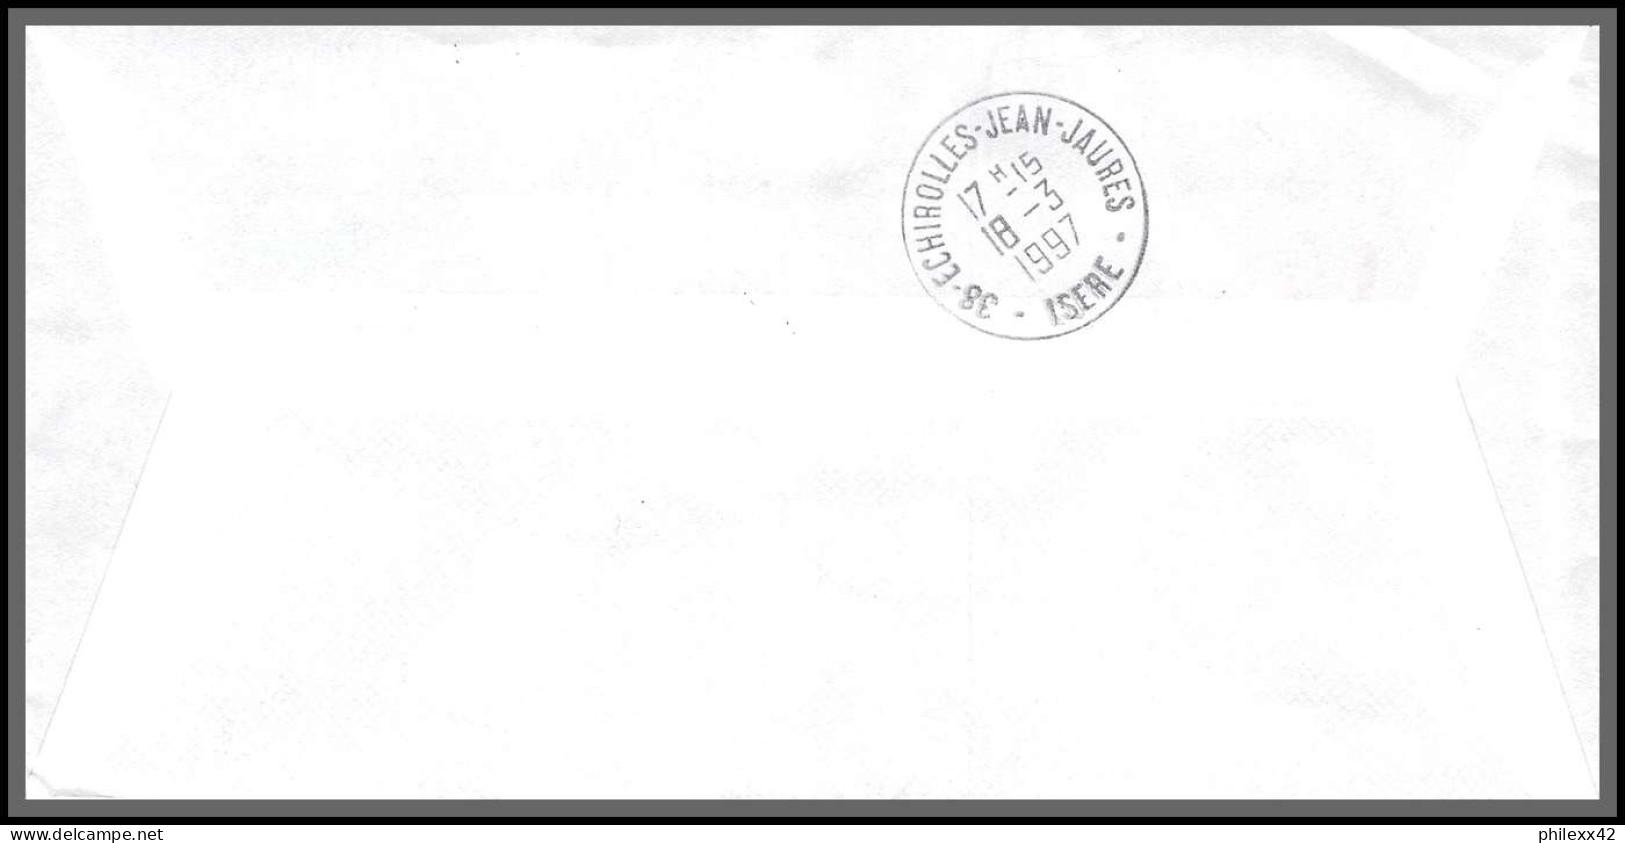 74019 Mixte Marianne Bicentenaire 11/3/1997 Pamandzi Mayotte Echirolles Isère Lettre Cover Colonies  - Covers & Documents